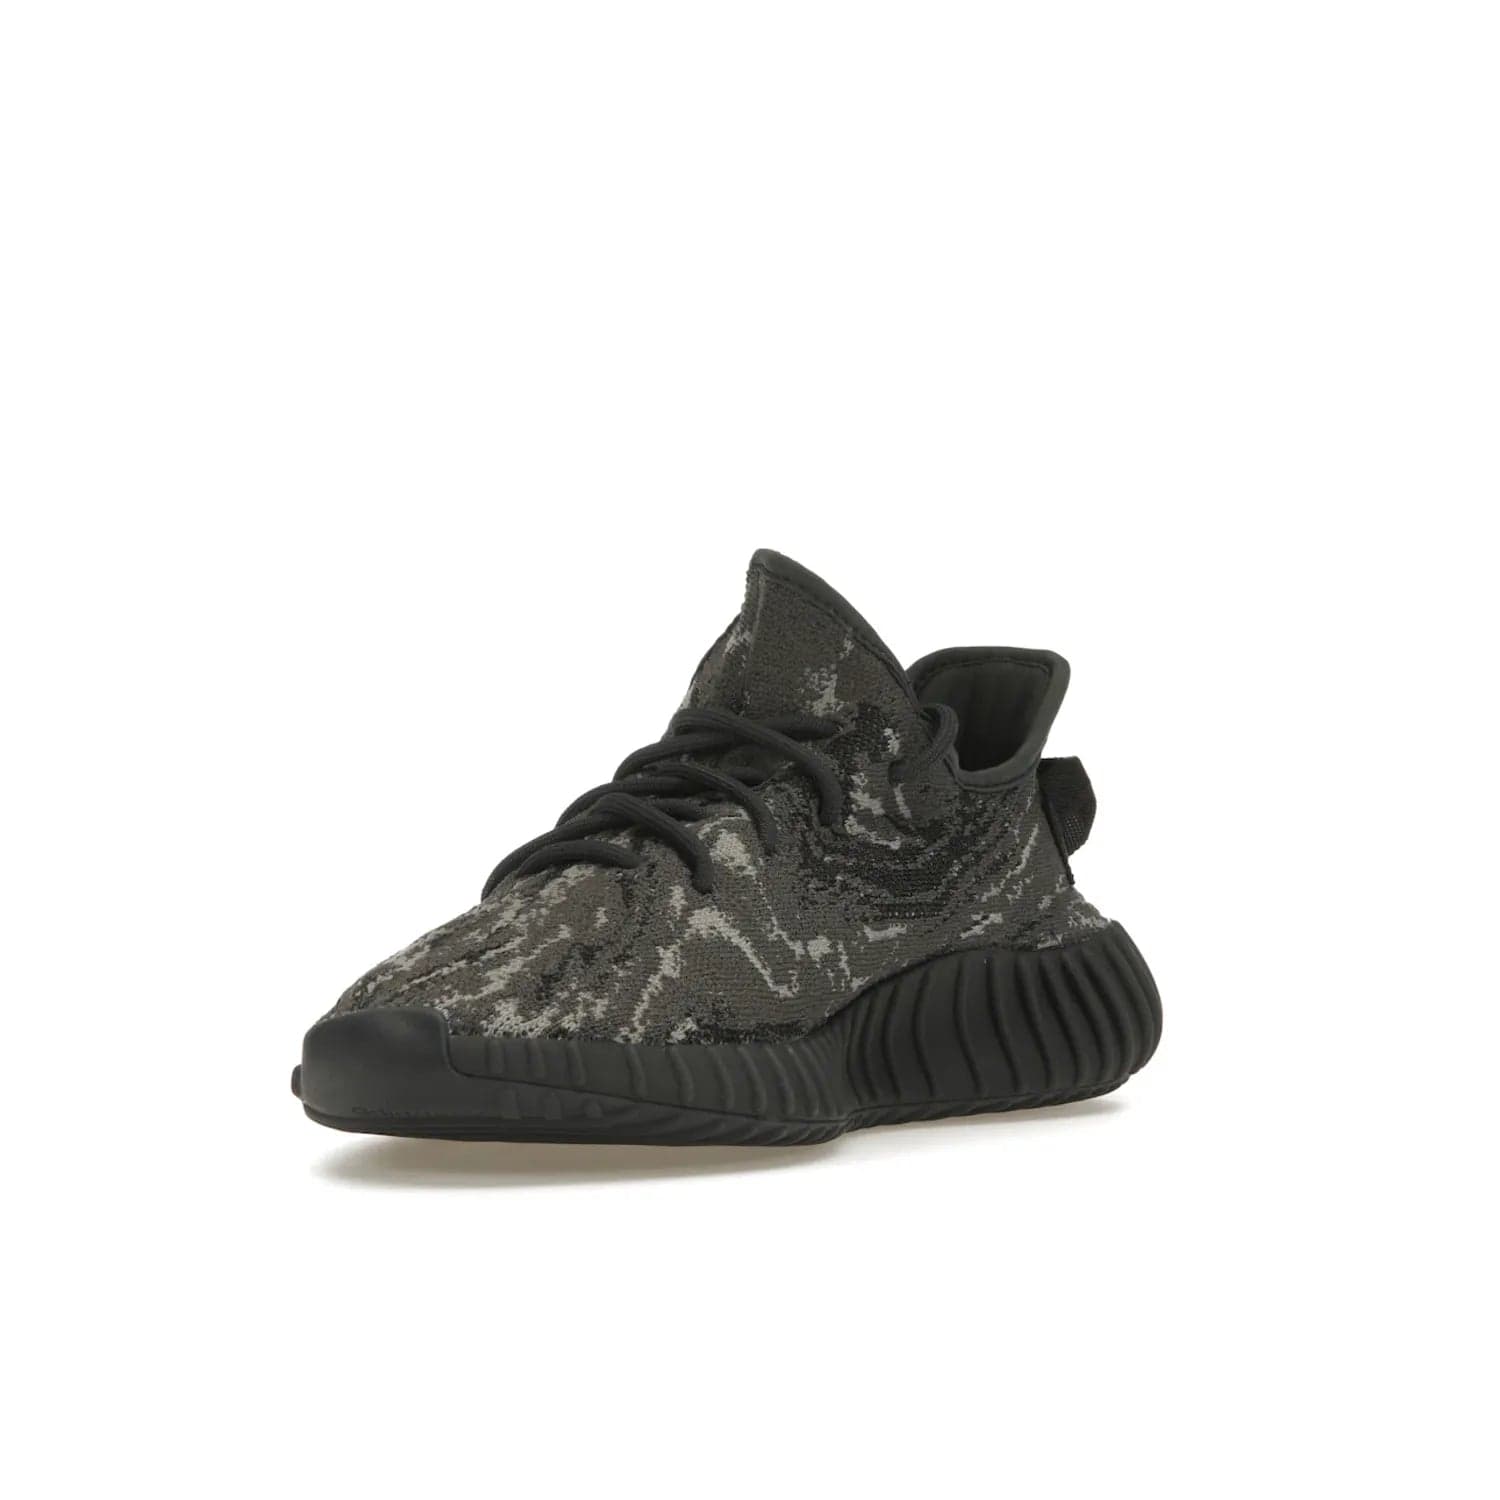 adidas Yeezy Boost 350 V2 MX Dark Salt - Image 14 - Only at www.BallersClubKickz.com - ##
The adidas Yeezy Boost 350 V2 MX Dark Salt offers a contemporary look with a signature combination of grey and black hues. Cushioned Boost midsole and side stripe allow for all day wear. Get the perfect fashion-forward addition with this sleek sneaker for $230.